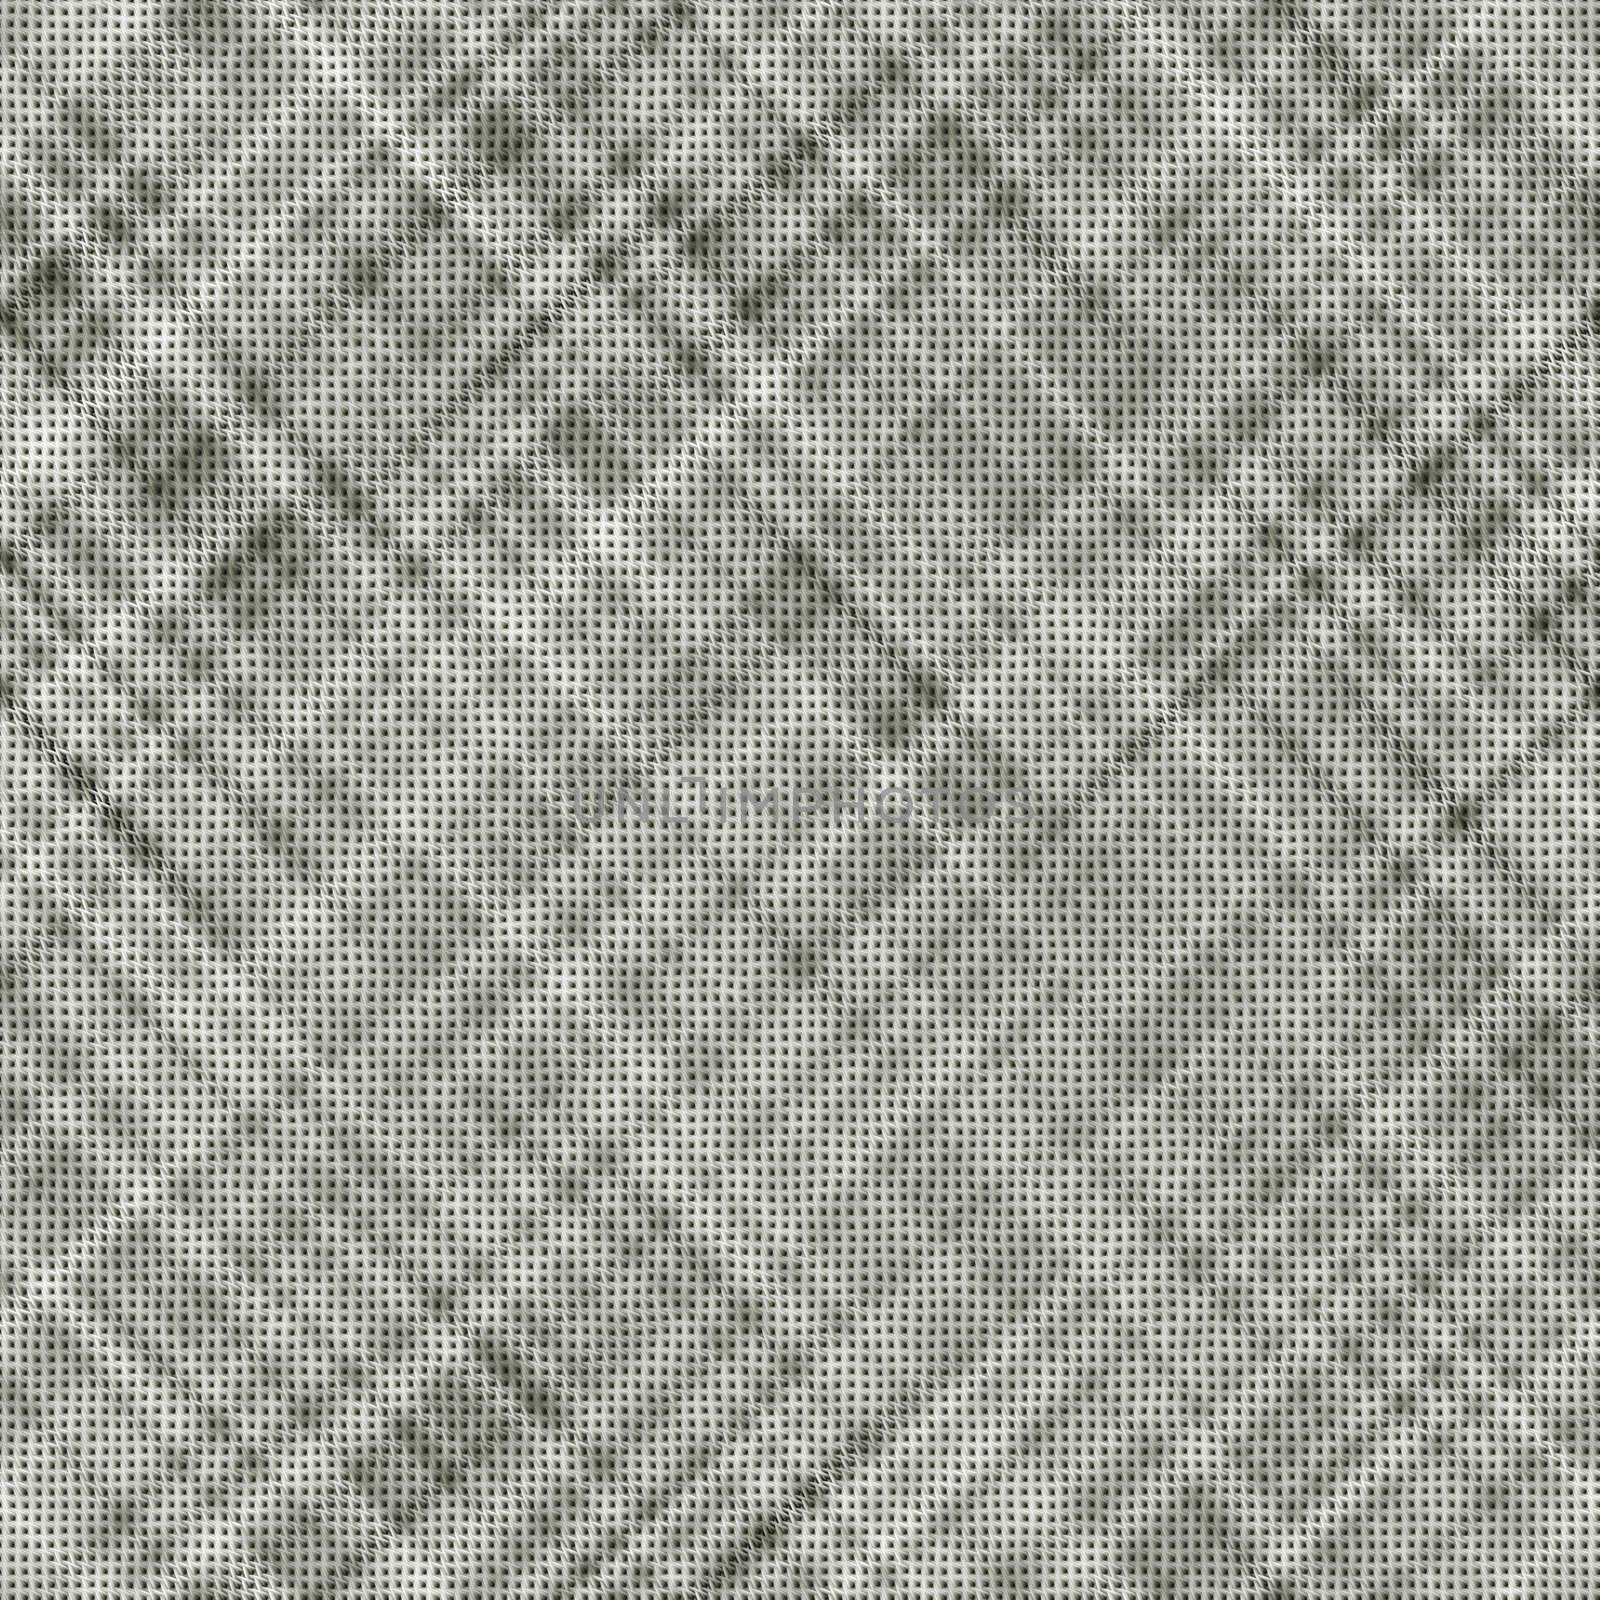 An image of a nice fabric background